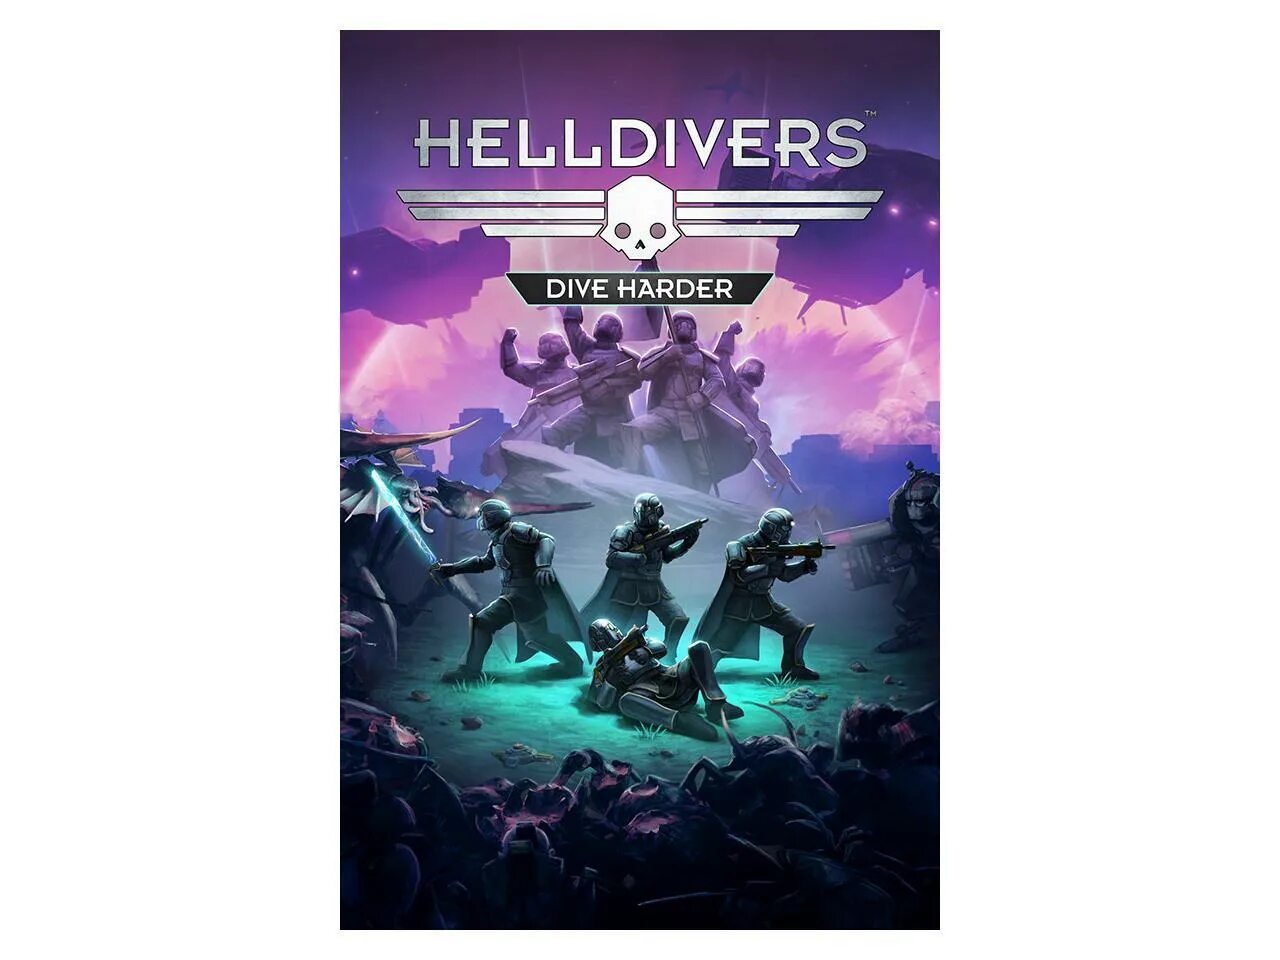 Helldivers. Helldivers Digital Deluxe Edition. Helldivers: Dive harder. Helldivers Dive harder Edition.